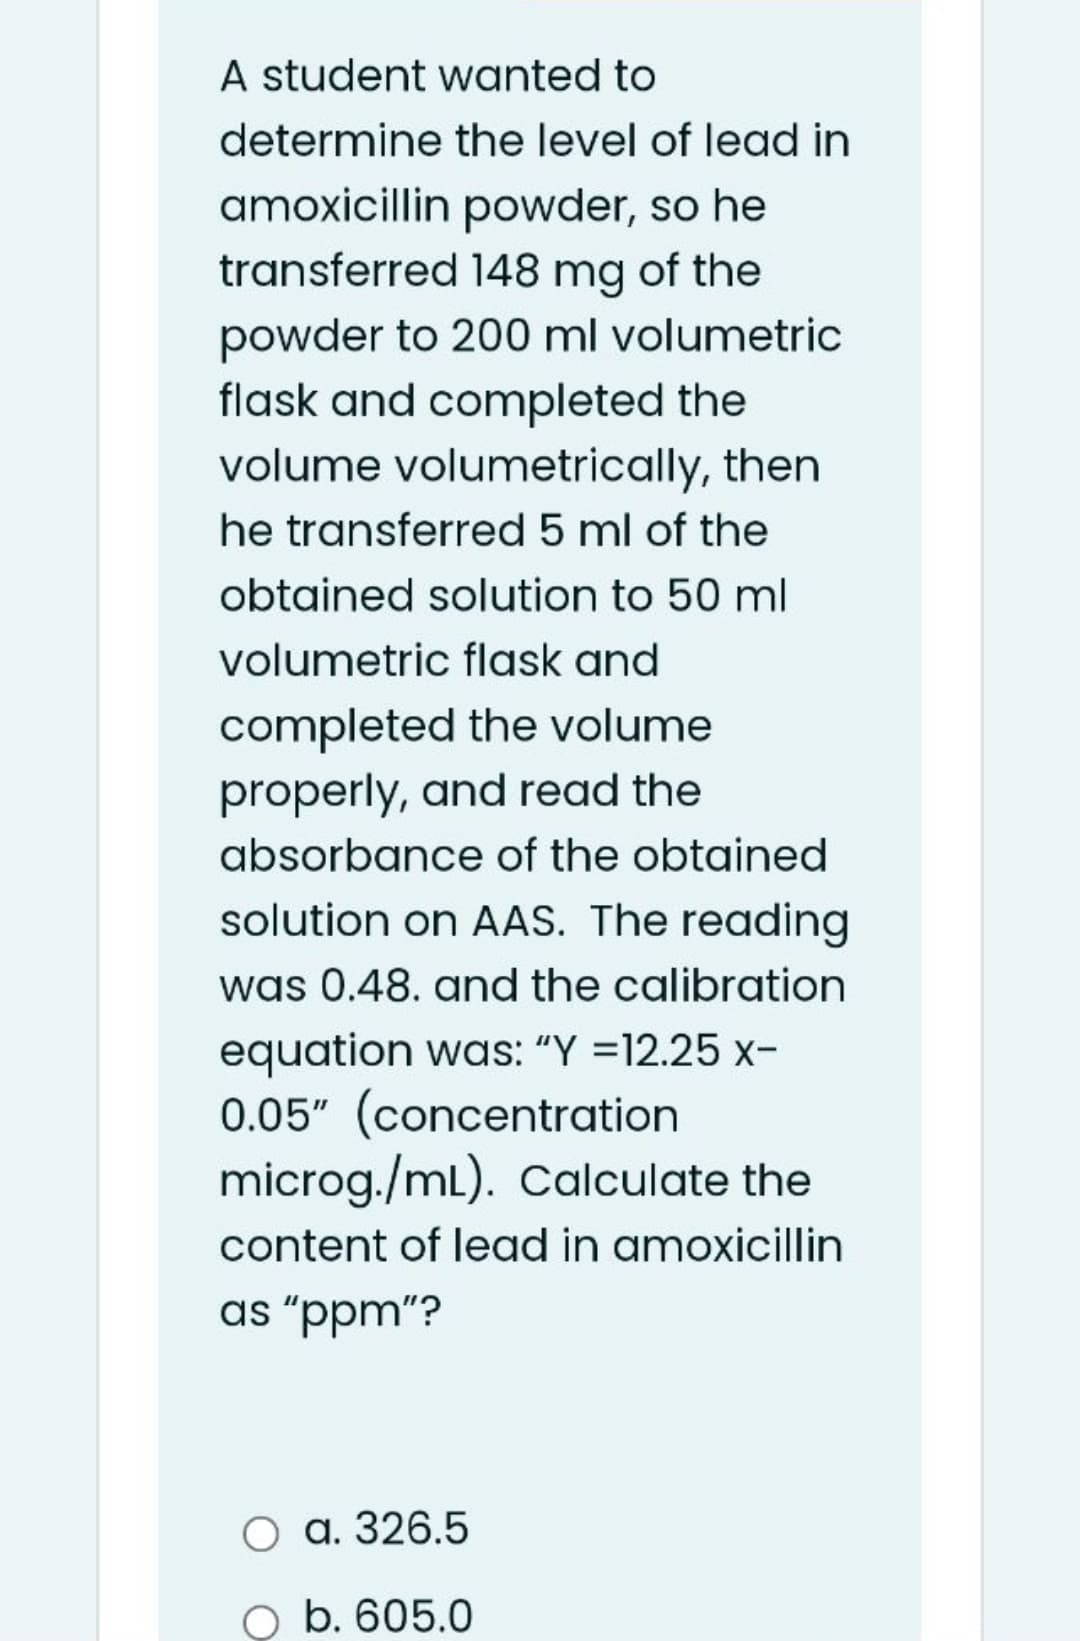 A student wanted to
determine the level of lead in
amoxicillin powder, so he
transferred 148 mg of the
powder to 200 ml volumetric
flask and completed the
volume volumetrically, then
he transferred 5 ml of the
obtained solution to 50 ml
volumetric flask and
completed the volume
properly, and read the
absorbance of the obtained
solution on AAS. The reading
was 0.48. and the calibration
equation was: "Y =12.25 x-
0.05" (concentration
microg./mL). Calculate the
content of lead in amoxicillin
as "ppm"?
O a. 326.5
O b. 605.0
